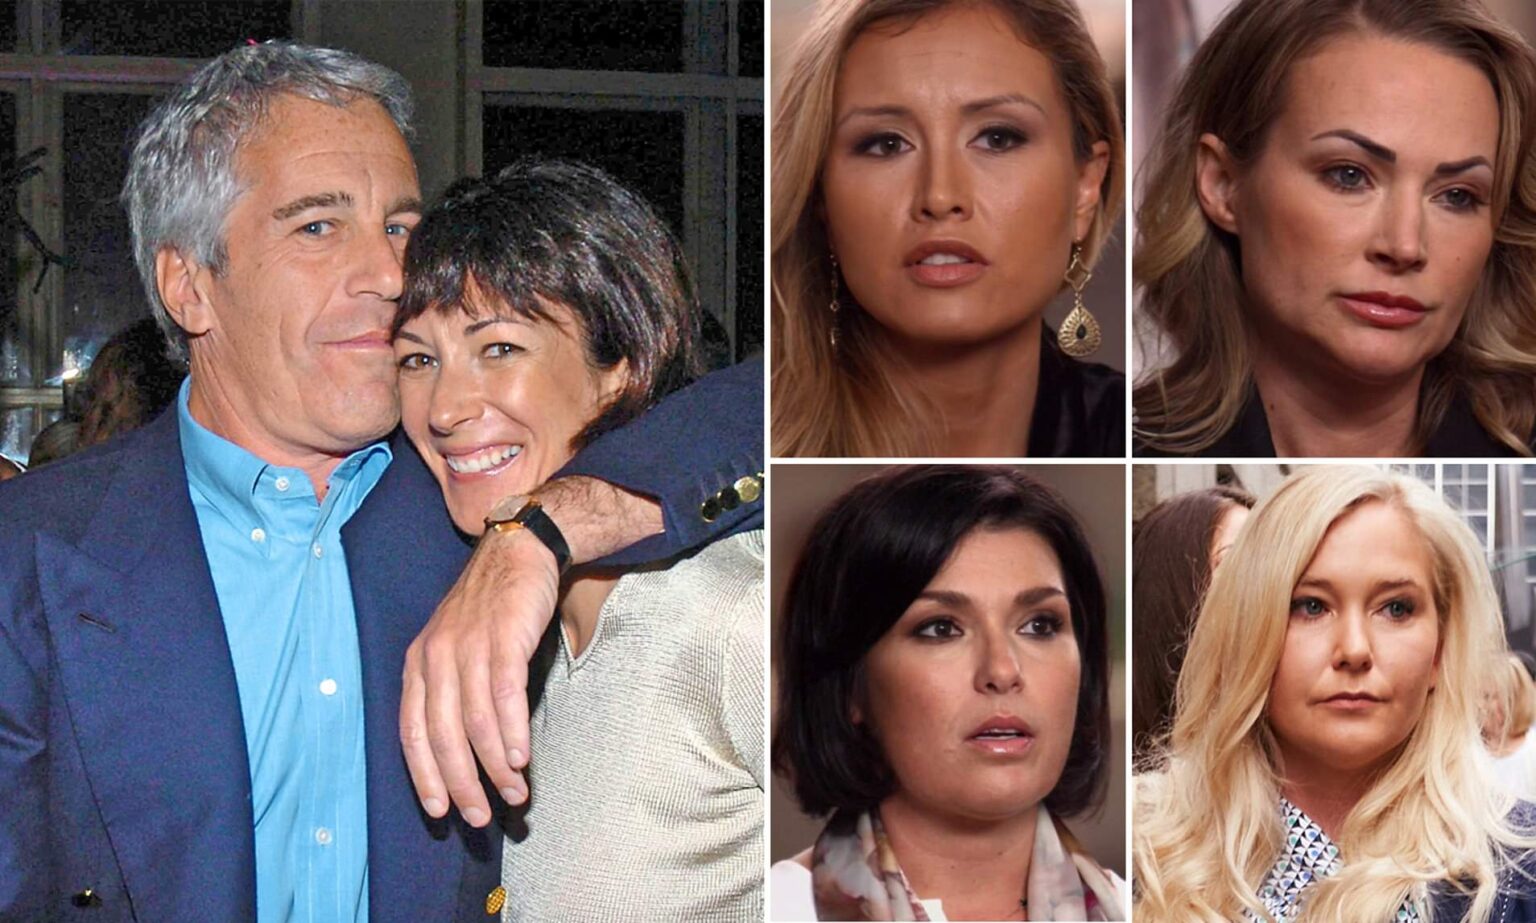 Jeffrey Epstein's estate has so many lawsuits against it, his net worth could be gone. Have his lawyers found a way to preserve his estate? Find out.